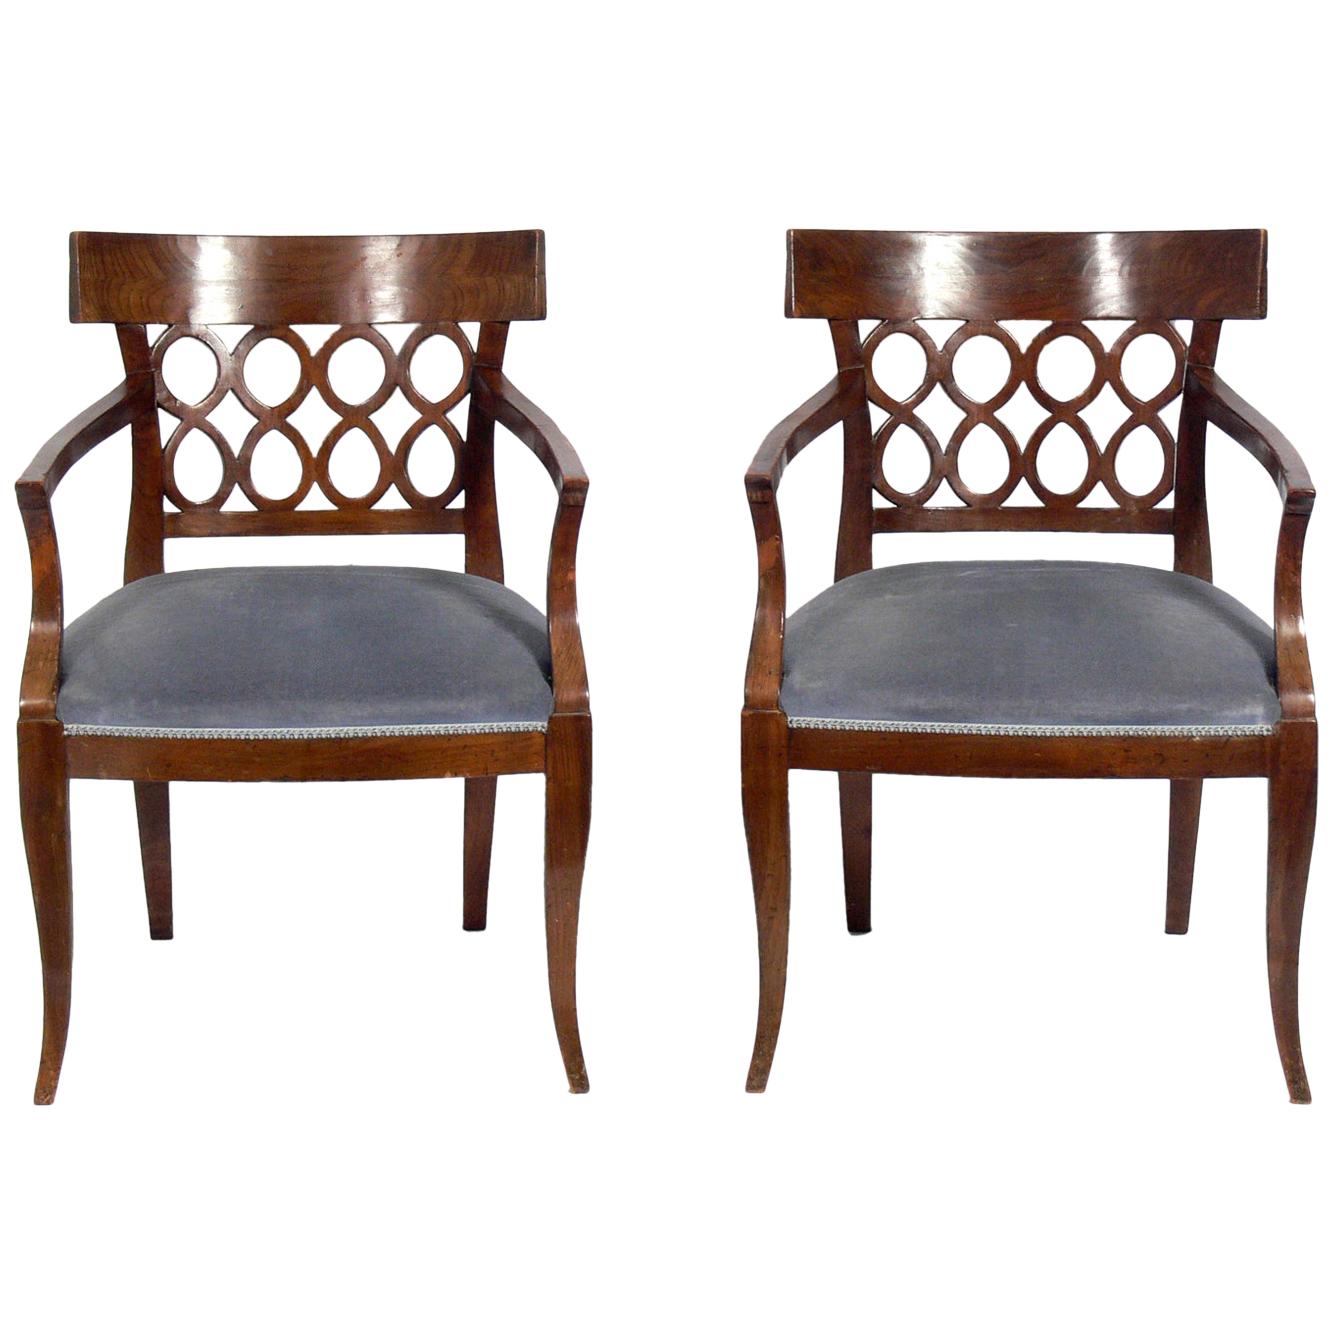 Pair of Curvaceous Italian Fret Back Chairs